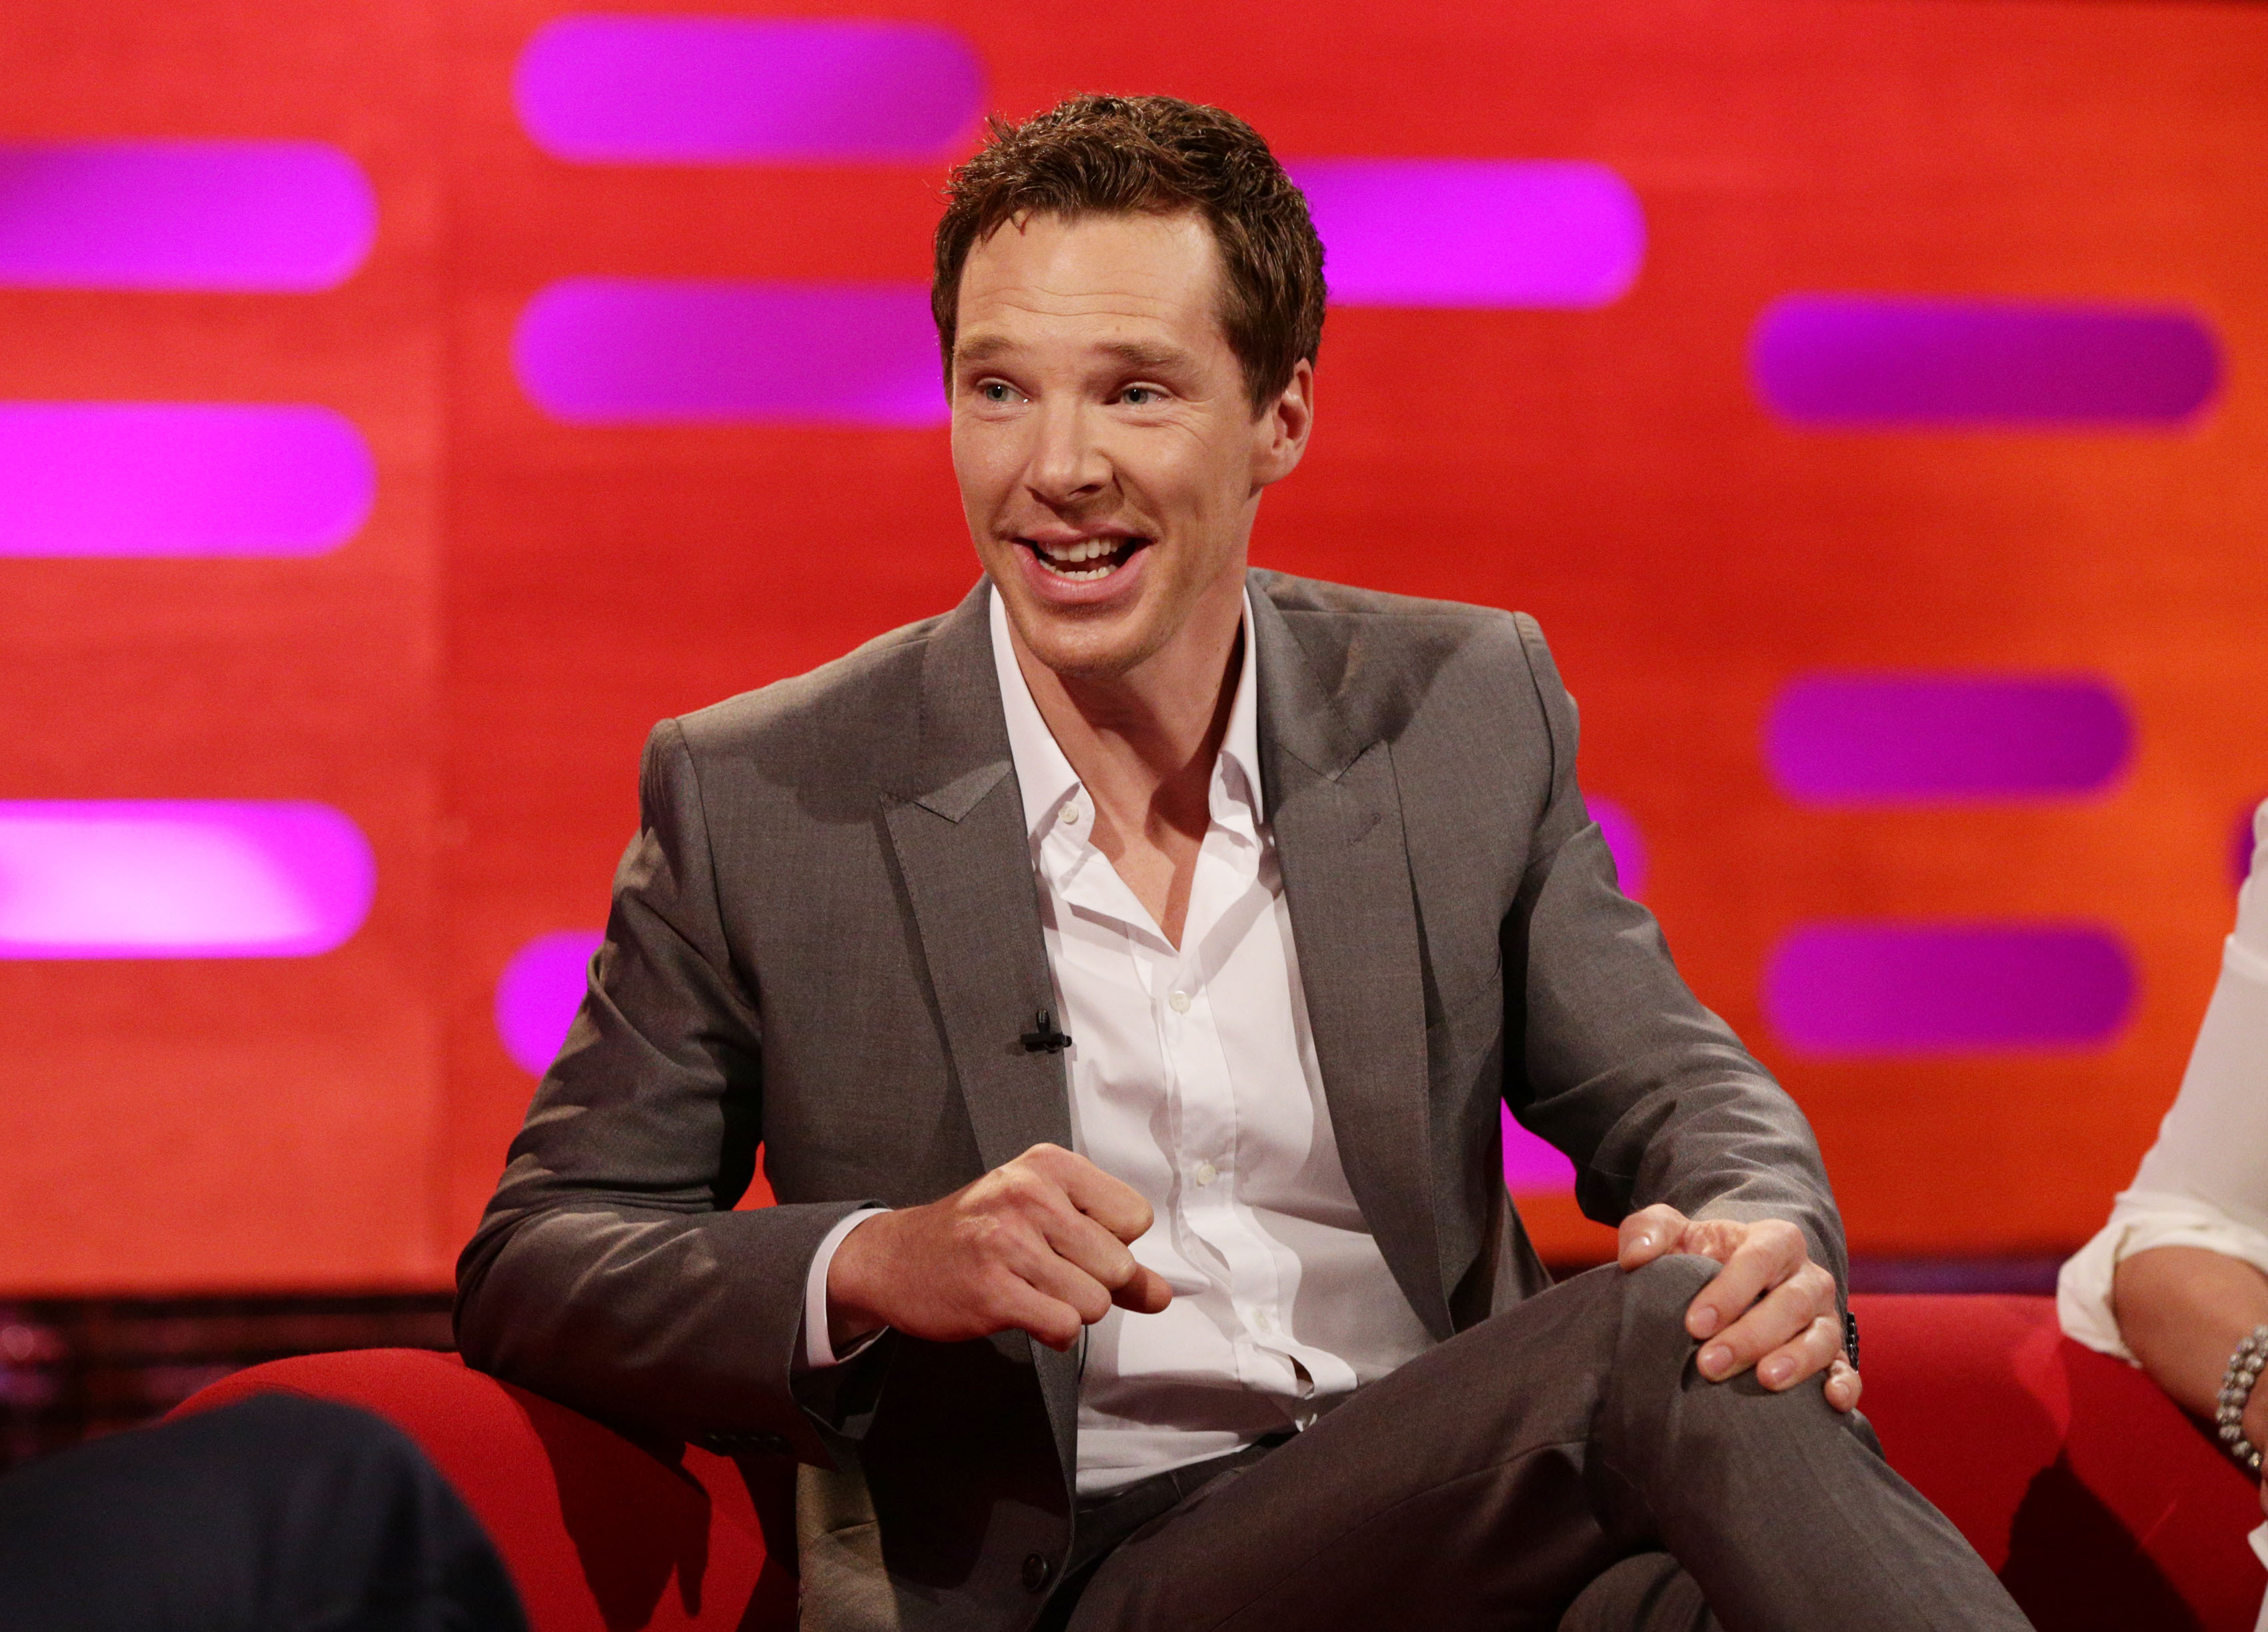 Graham Norton Show - London. Benedict Cumberbatch during filming of the Graham Norton Show at the London Studios, London, to be aired on BBC One on Friday evening. Picture date: Thursday October 23, 2014. Photo credit should read: Yui Mok/PA Wire URN:21270396 (Yui Mok—PA Wire/Press Association Images)